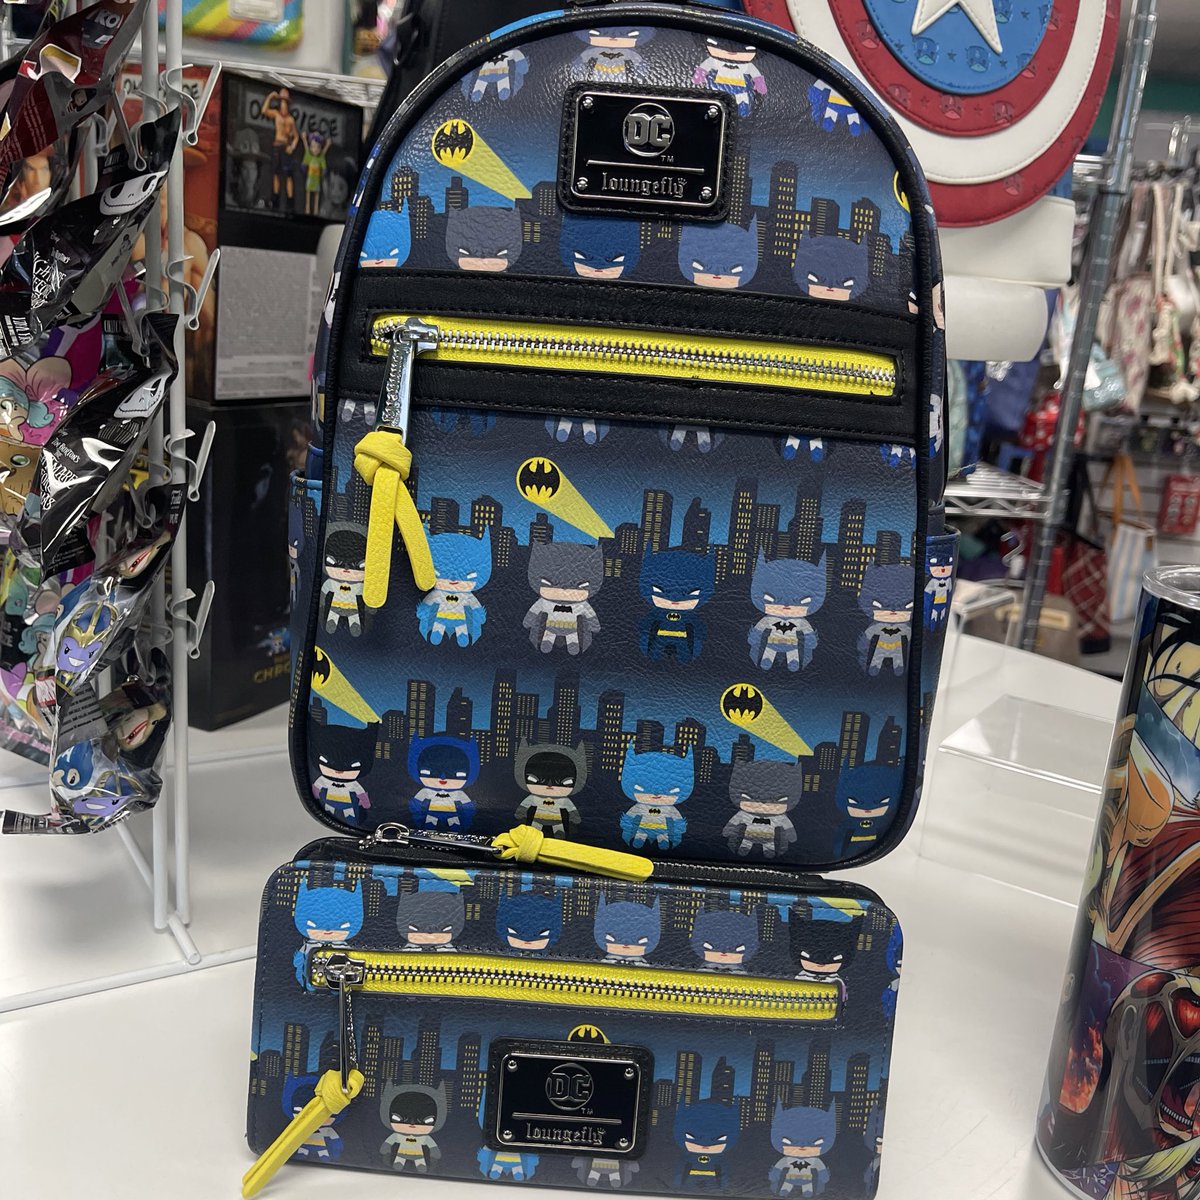 Found this Loungefly Batman hiding in the warehouse. Now in store & online. We’ve got the matching wallet too! (You know who you are 🤭)

#loungefly #loungeflyminibackpack #loungeflycollector #loungeflyaddict #batman #dc #hinesville #fortstewart #supportadream #greenlotusdreams